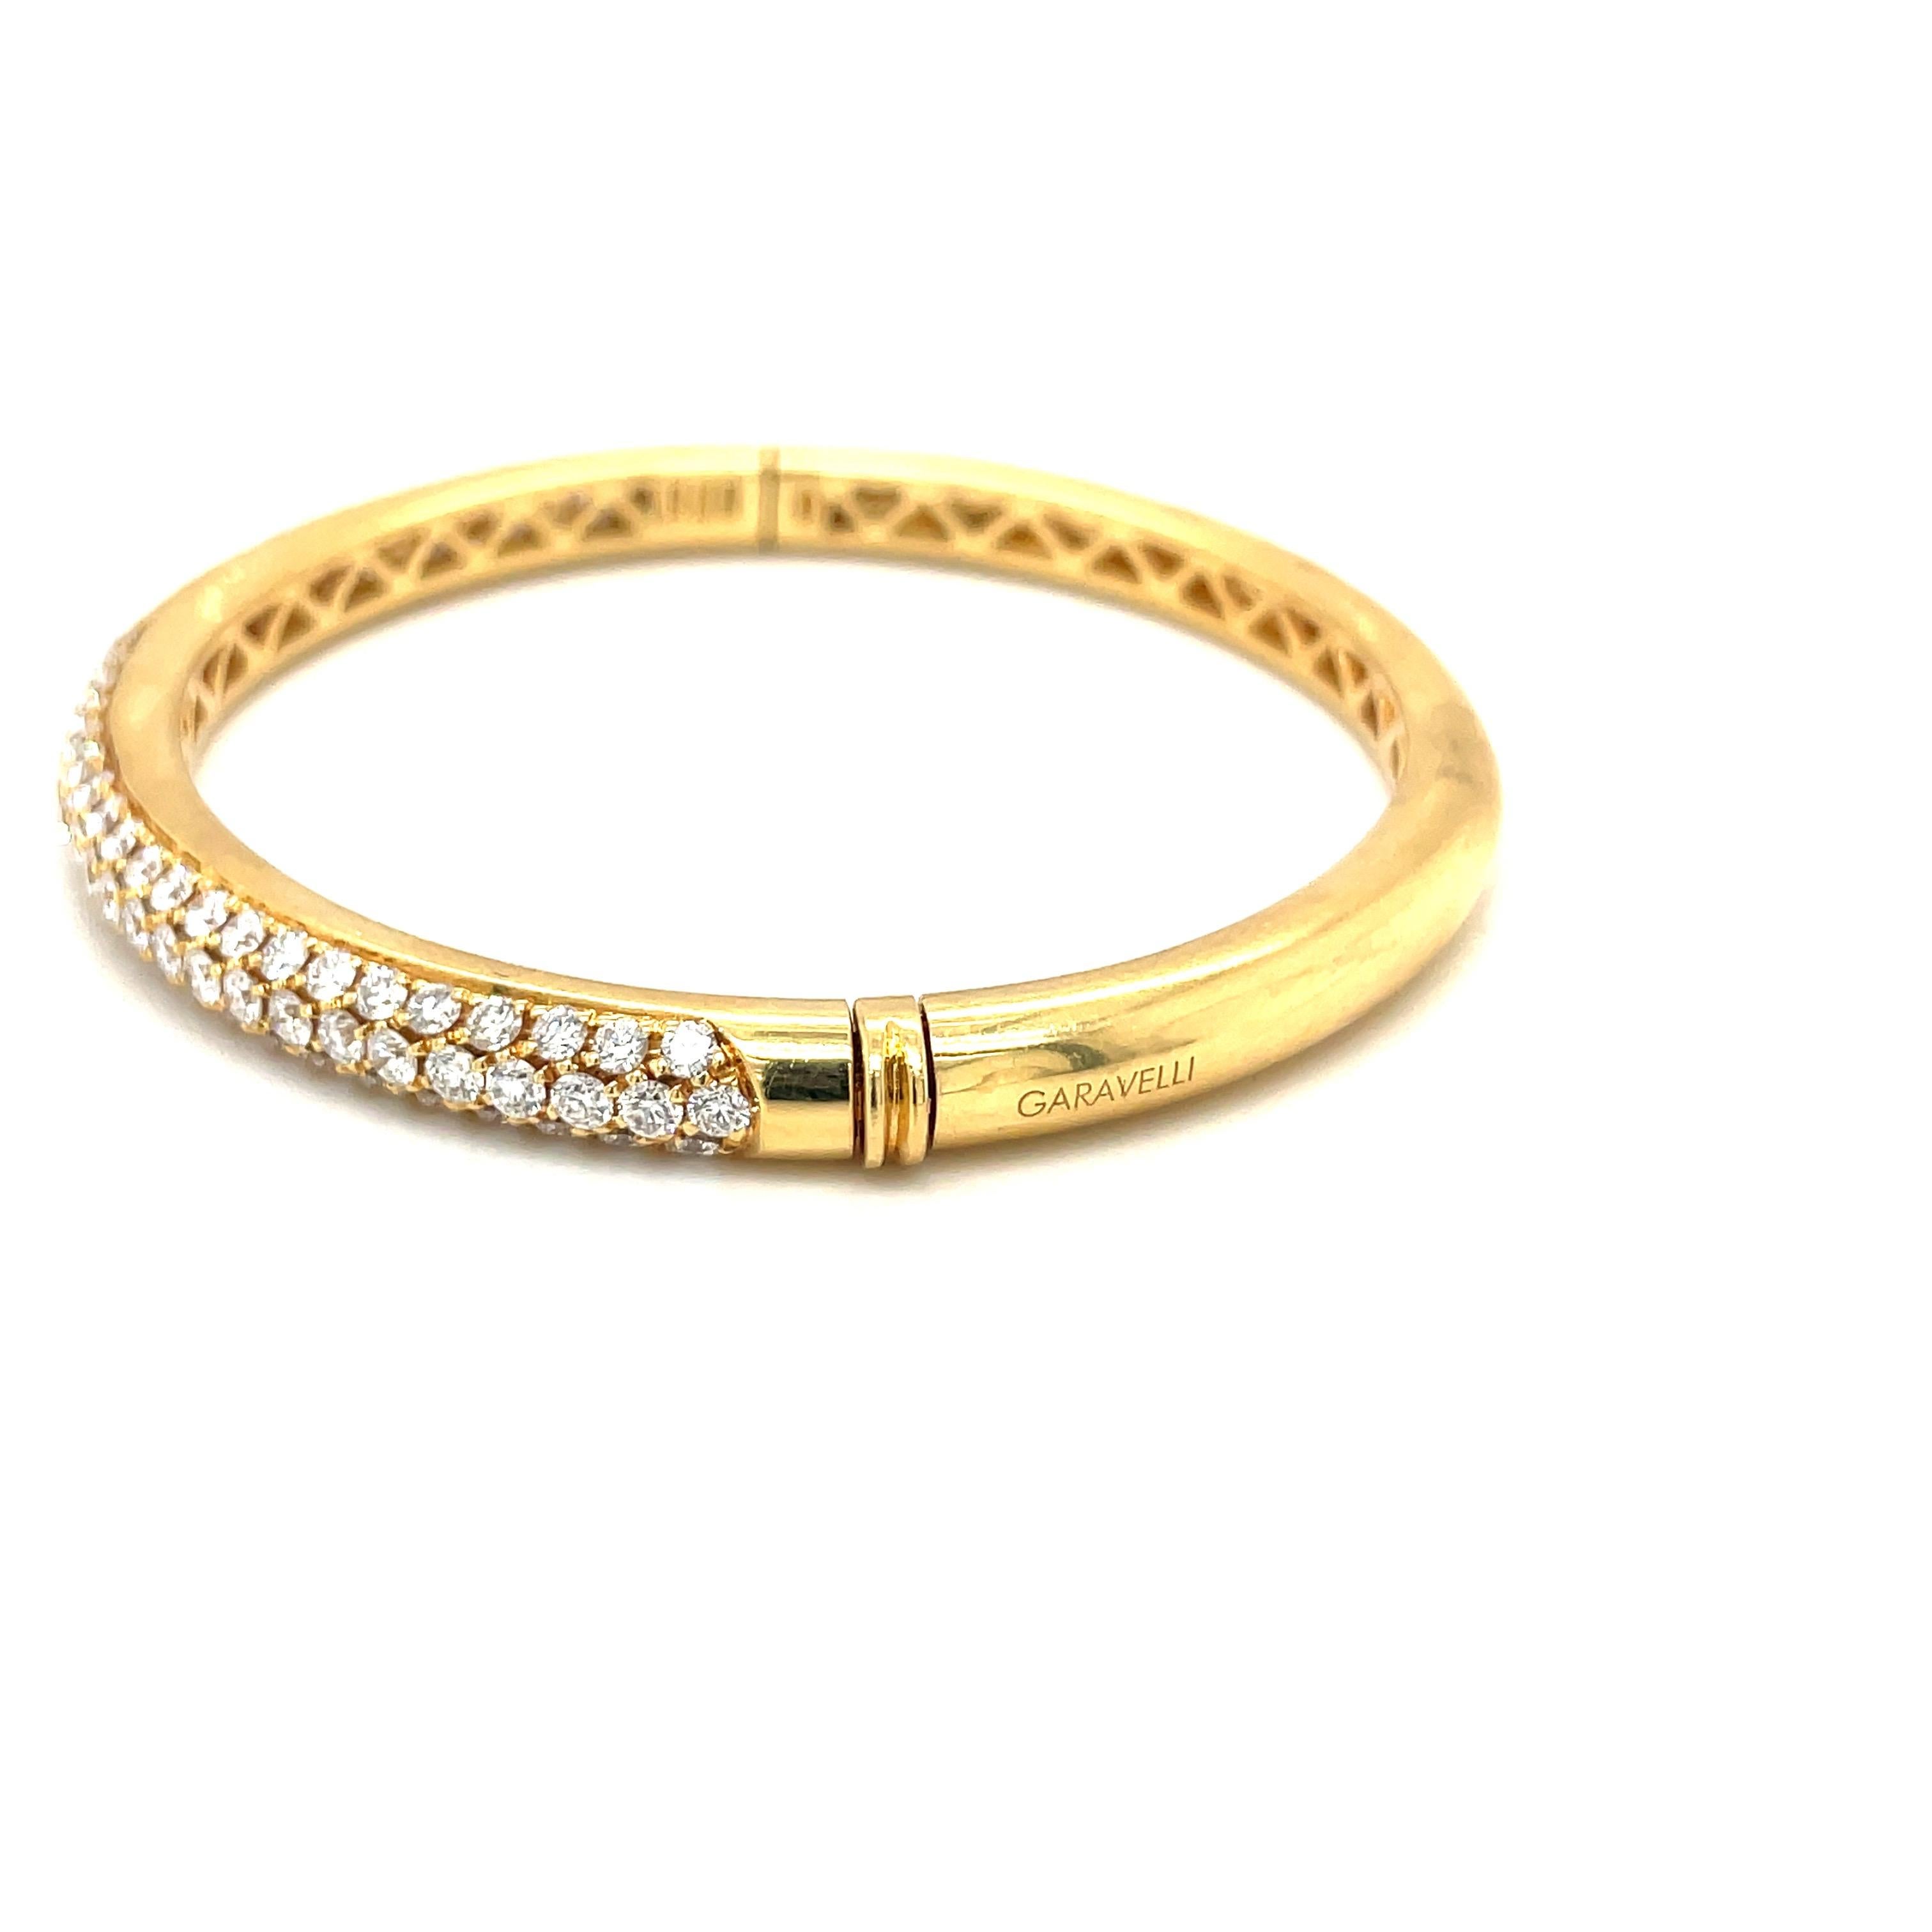 Crafted in Italy by Aldo Garavelli this  18 karat yellow gold bangle bracelet is  pave' set with 3.90 carats of round brilliant diamonds. The oval shaped bracelet measures 2.25